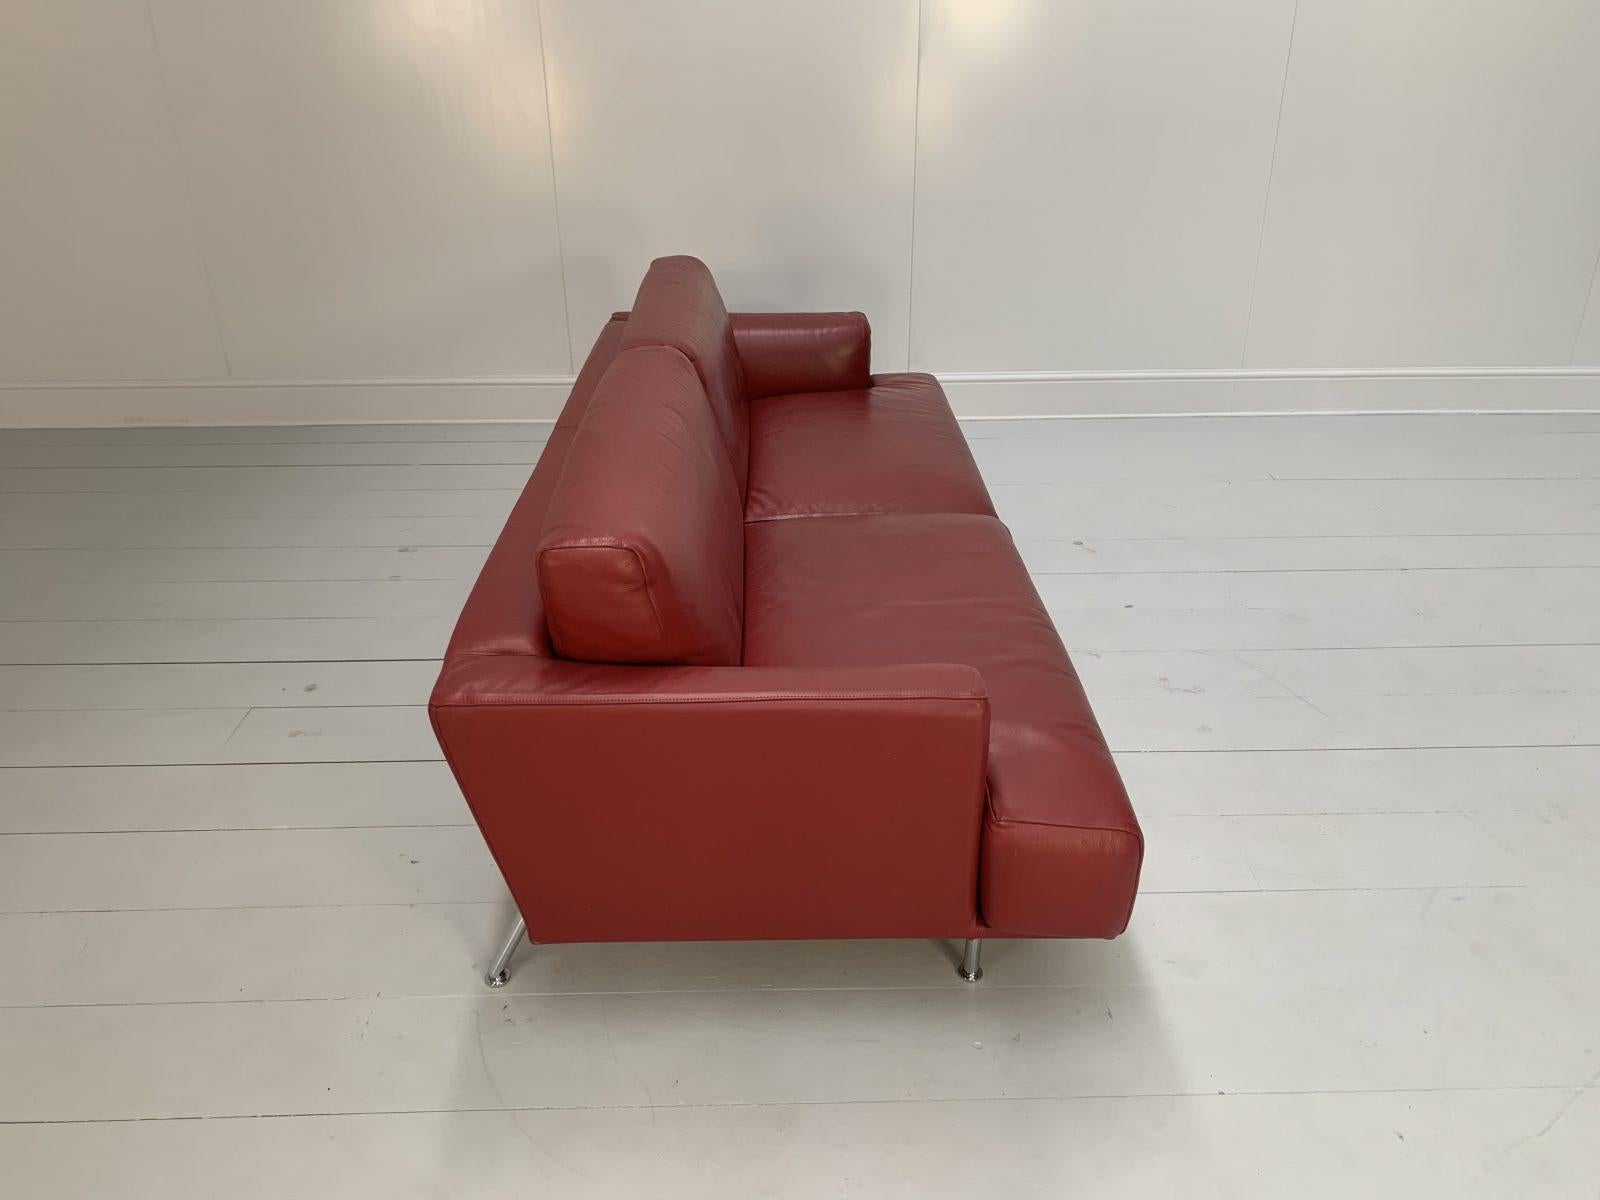 Cassina “253 Nest” 2.5-Seat Sofa & Bench Footstool – In Red “Pelle” Leather 9